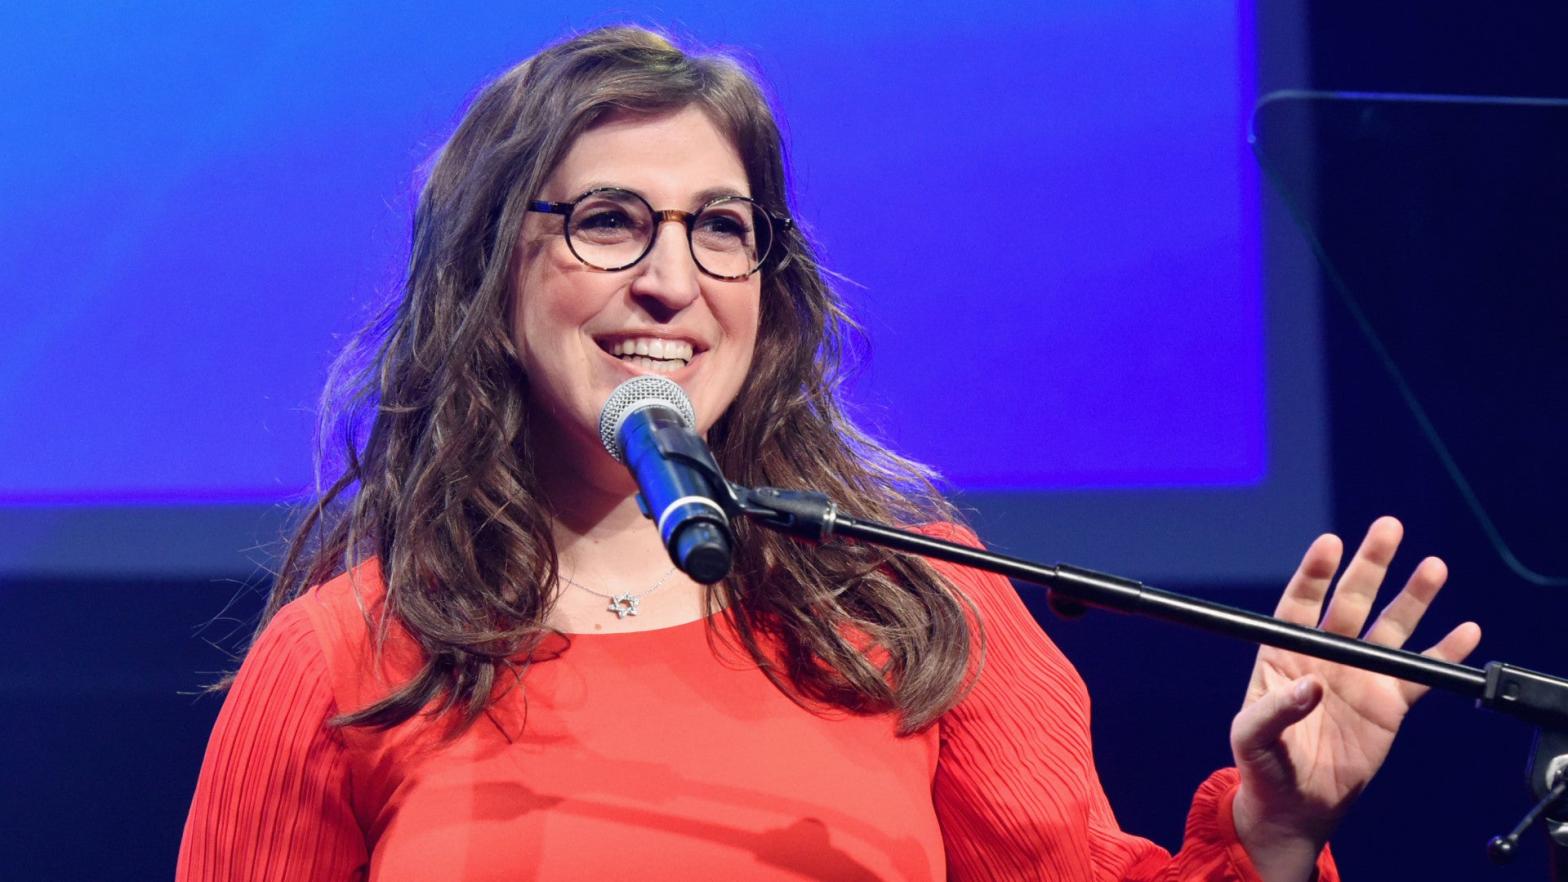 Mayim Bialik speaks onstage during the 70th Anniversary of Israel celebration in 2018. (Photo: Vivien Killilea, Getty Images)